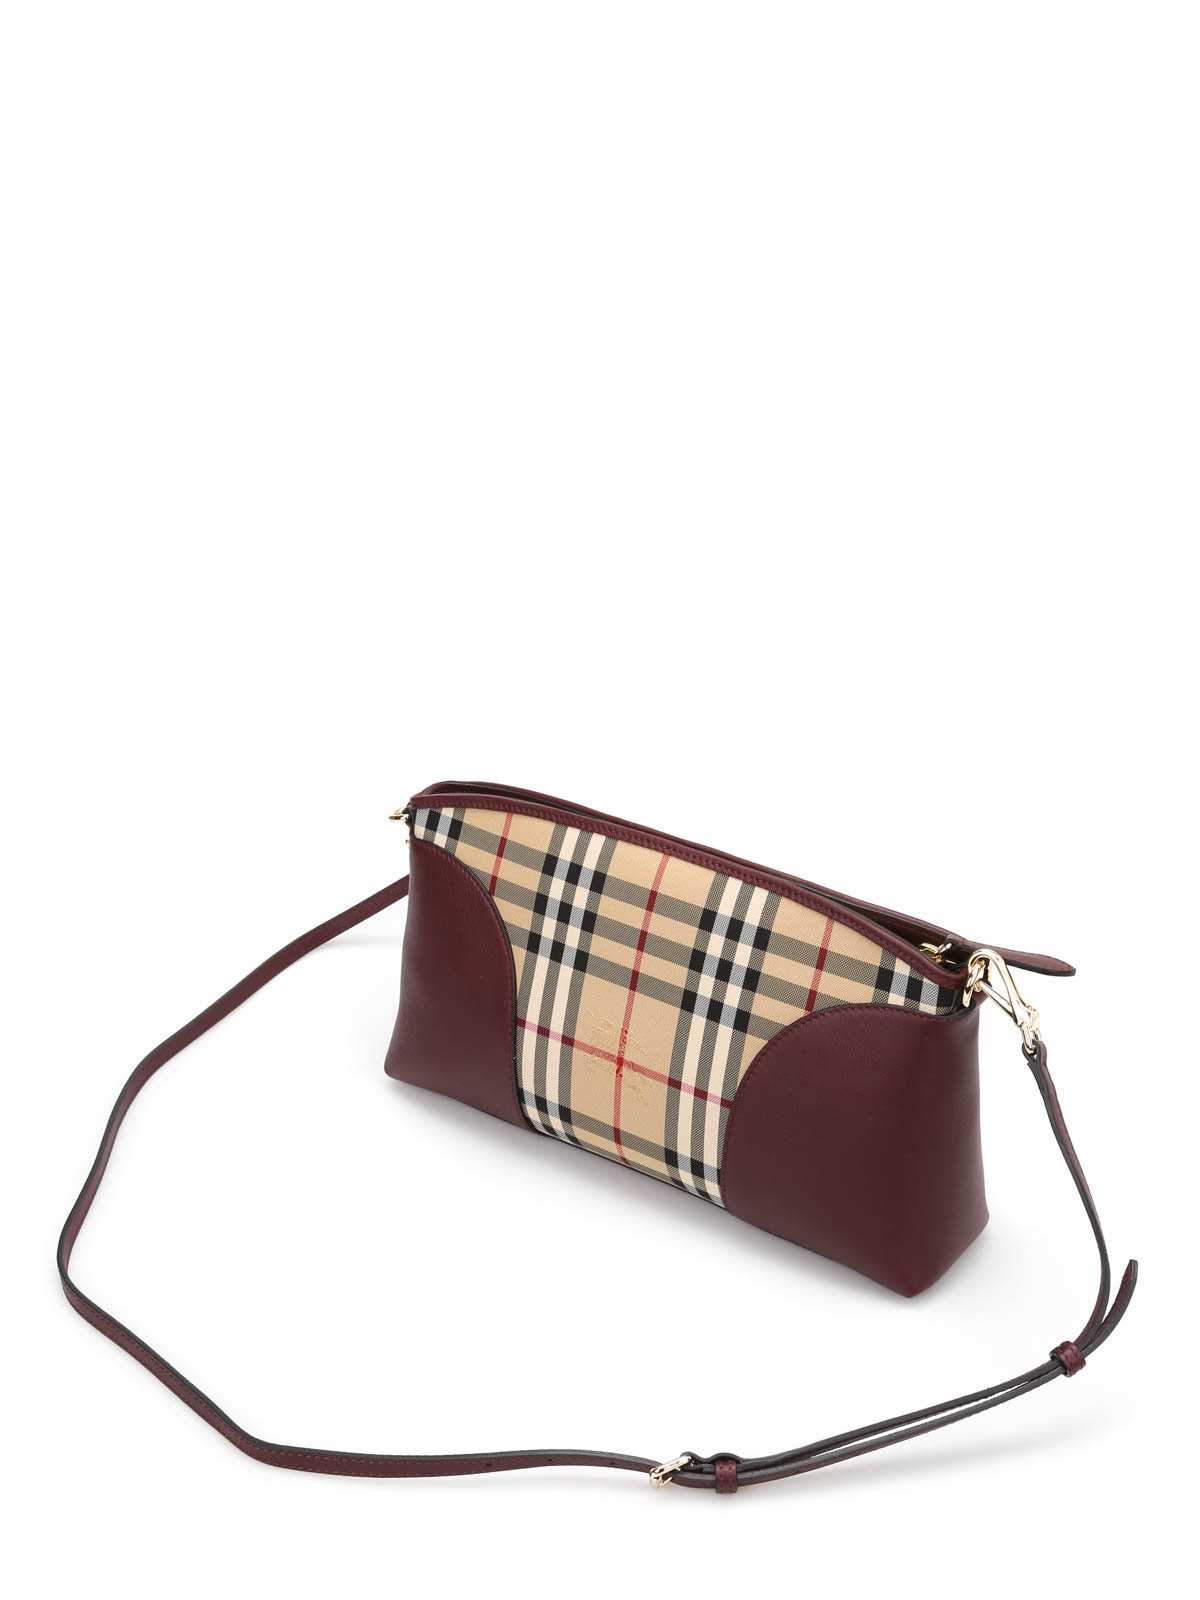 Cross body bags Burberry - Horseferry check Chichester